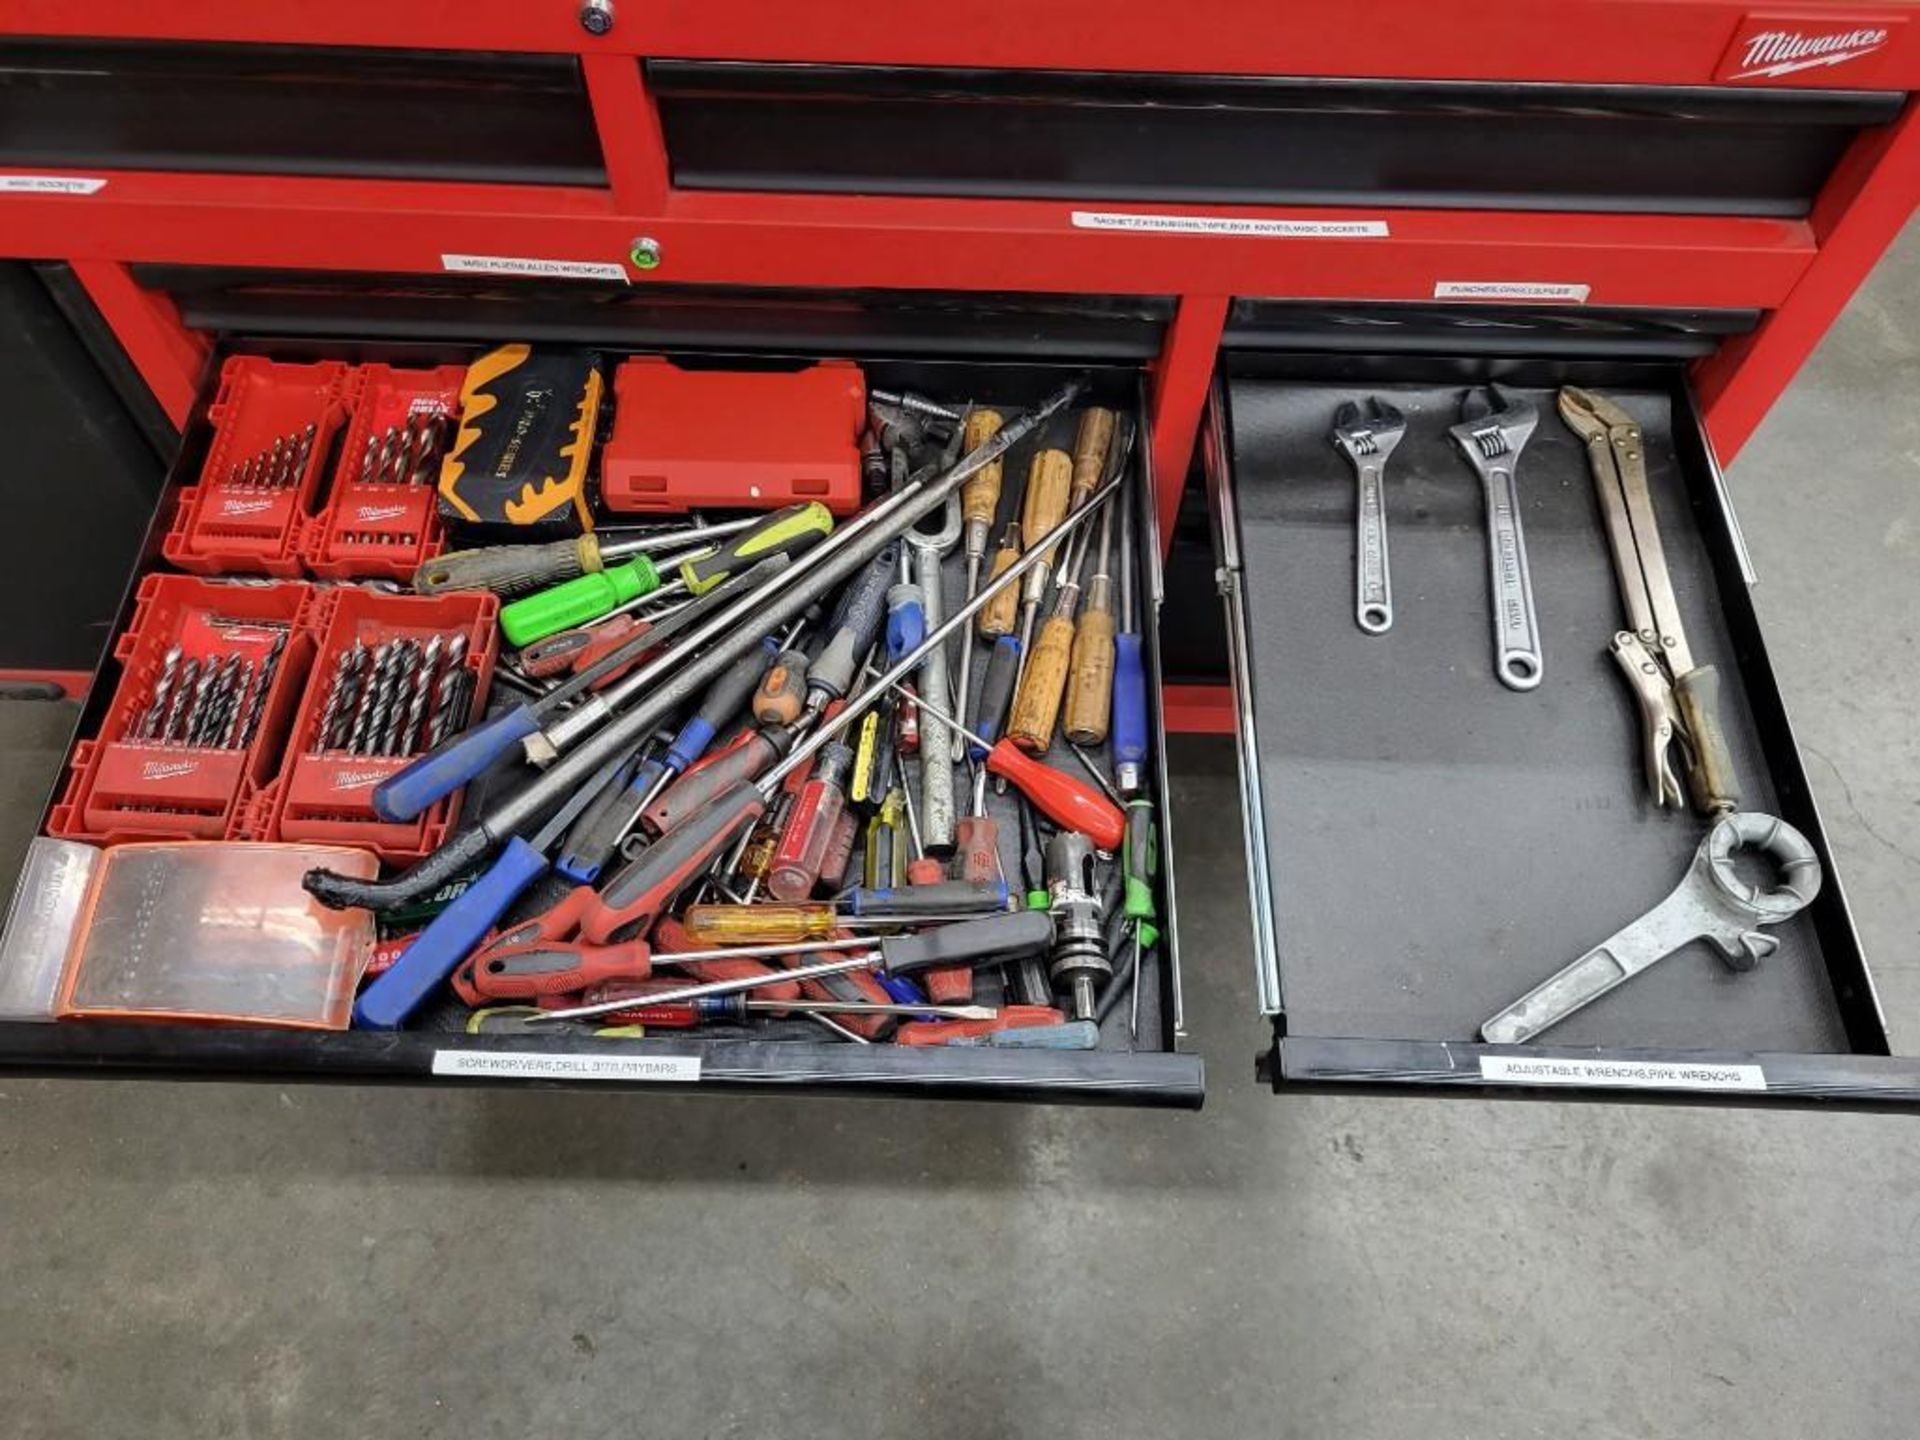 MILWAUKEE 60" MOBILE WORKBENCH LOADED WITH TOOLS - Image 13 of 18